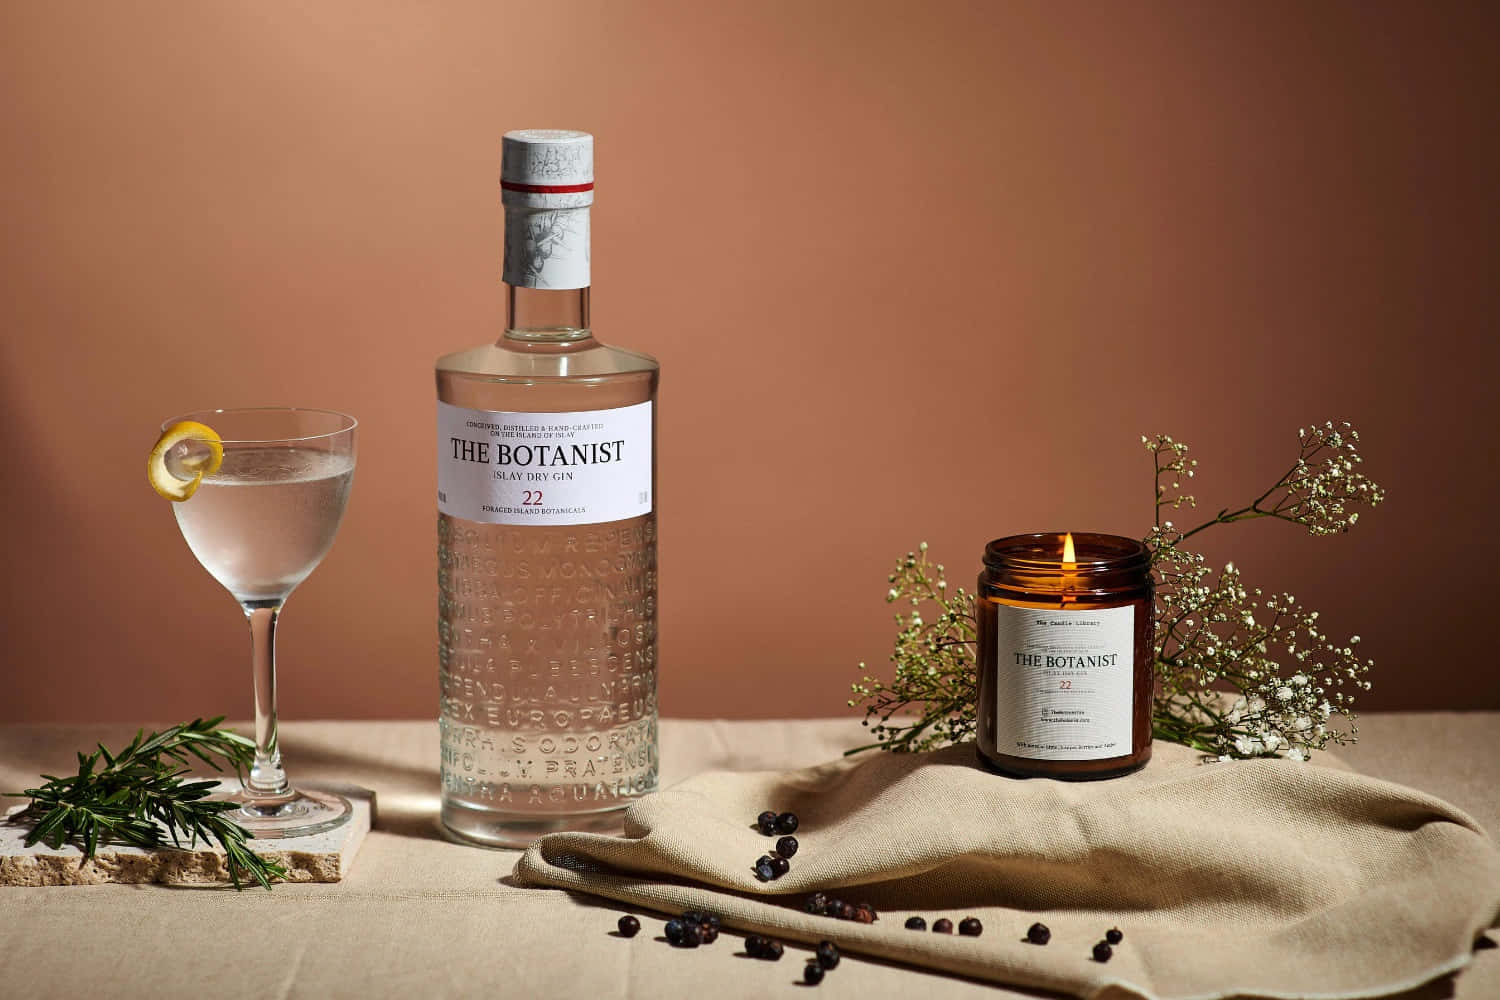 The Botanist Islay Dry Gin Alcoholic Drink And Candle Wallpaper